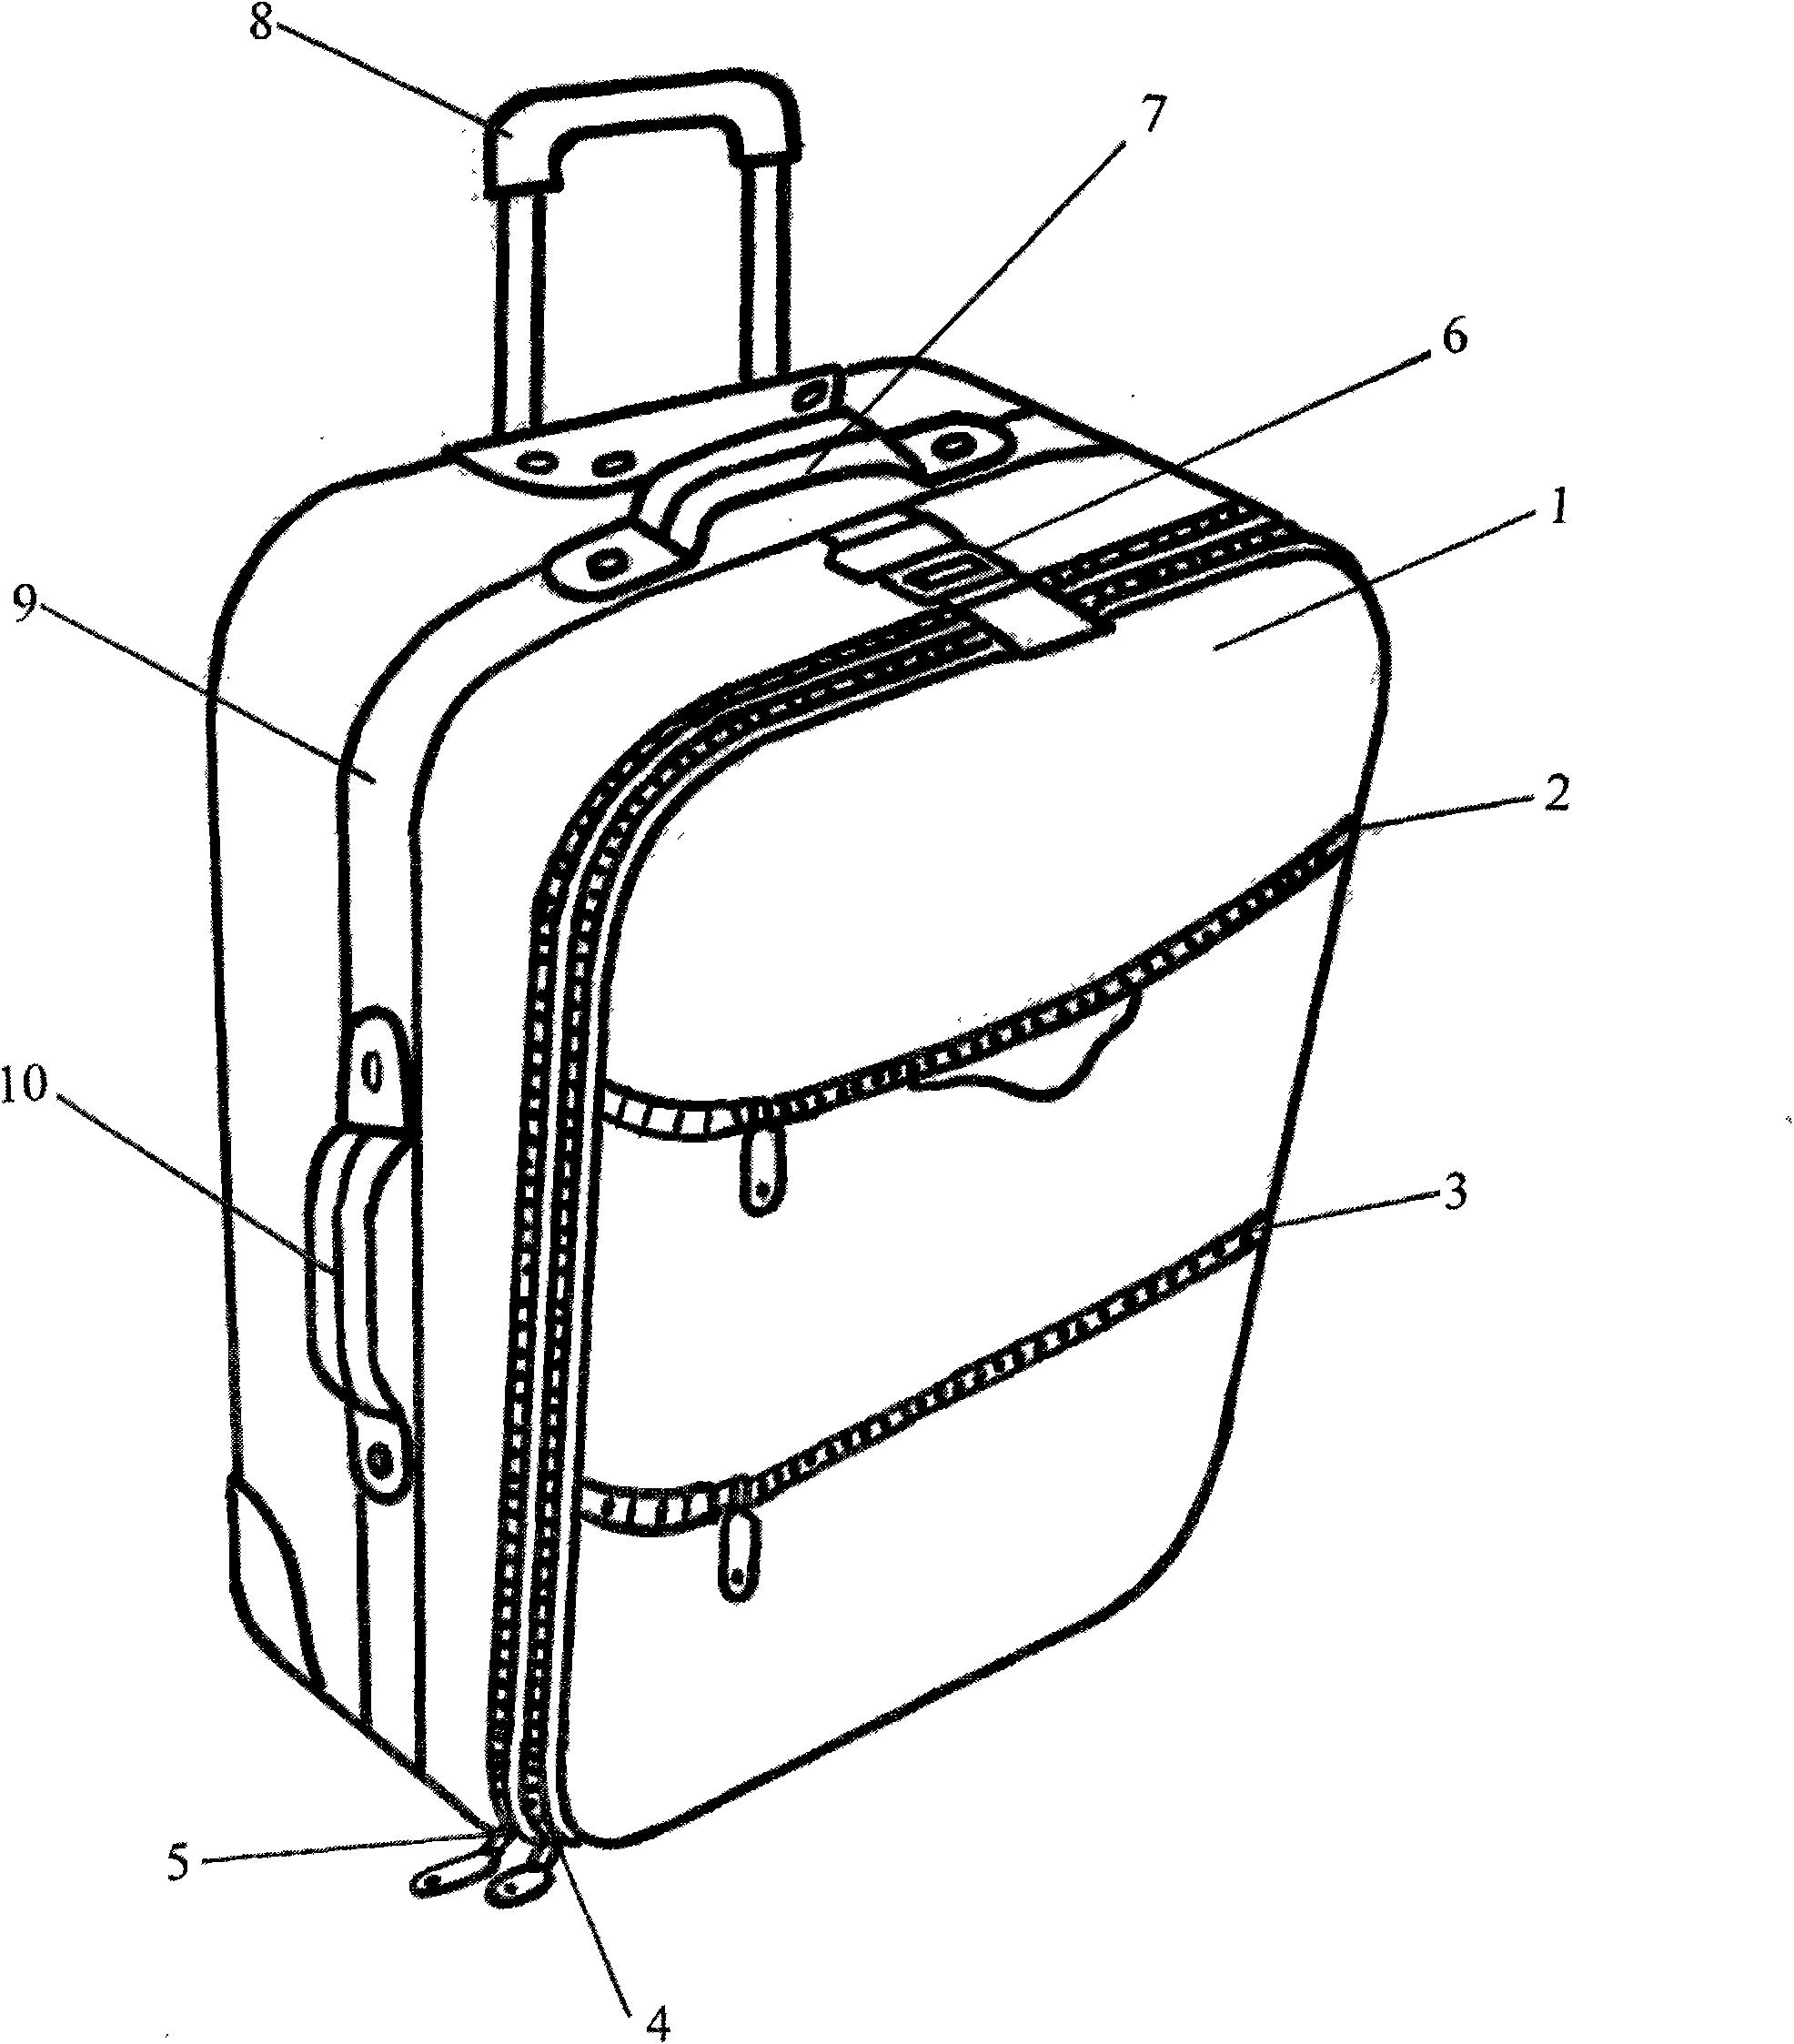 Draw-bar box with two pocket mouths for loading two zippers on front surface of box